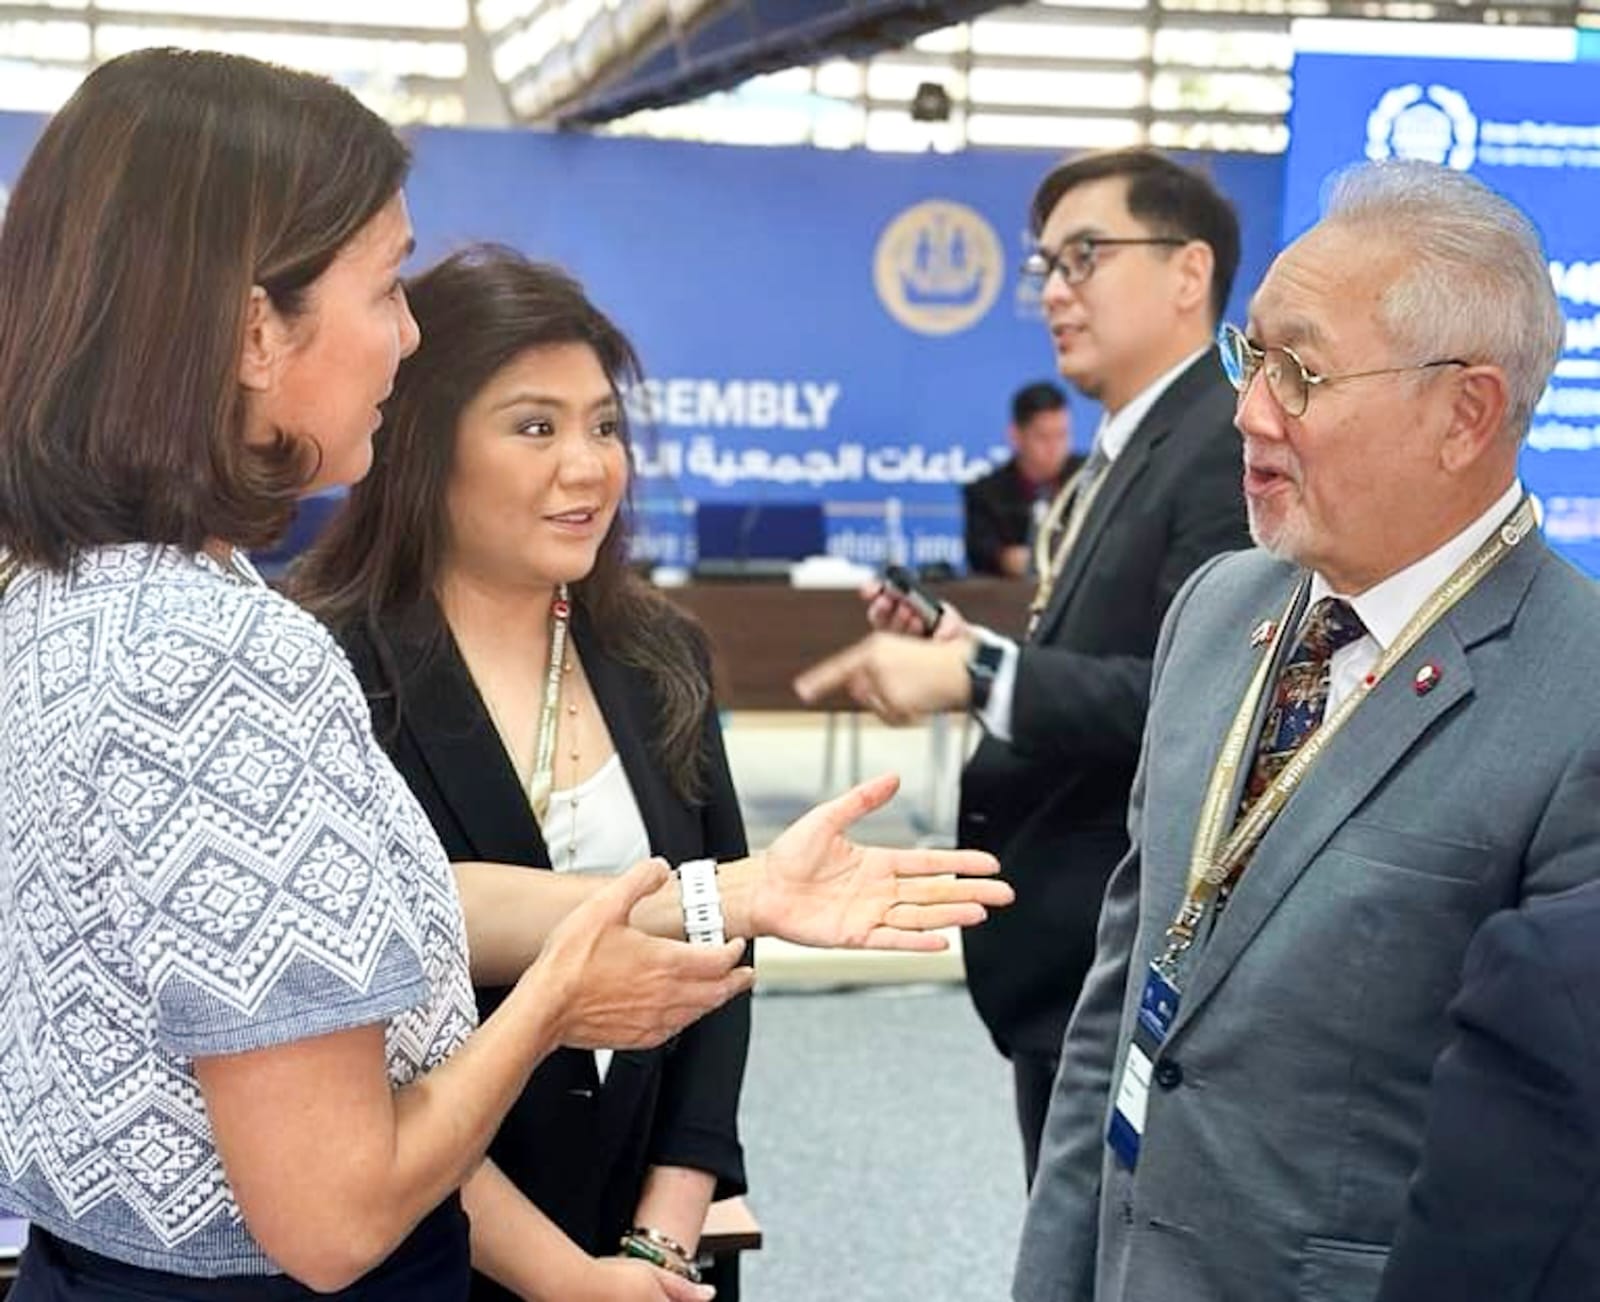 Philippine Senator Pia Cayetano and Pangasinan 3rd District Representative Rachel Arenas (first and second from left) confer with Thailand's Member of Parliament Kiat Sittheeamorn (right) at the sidelines of the 146th Inter-Parliamentary Union (IPU) assembly and related meetings being held in Manama, Bahrain. | Photo from Sen. Cayetano’s office